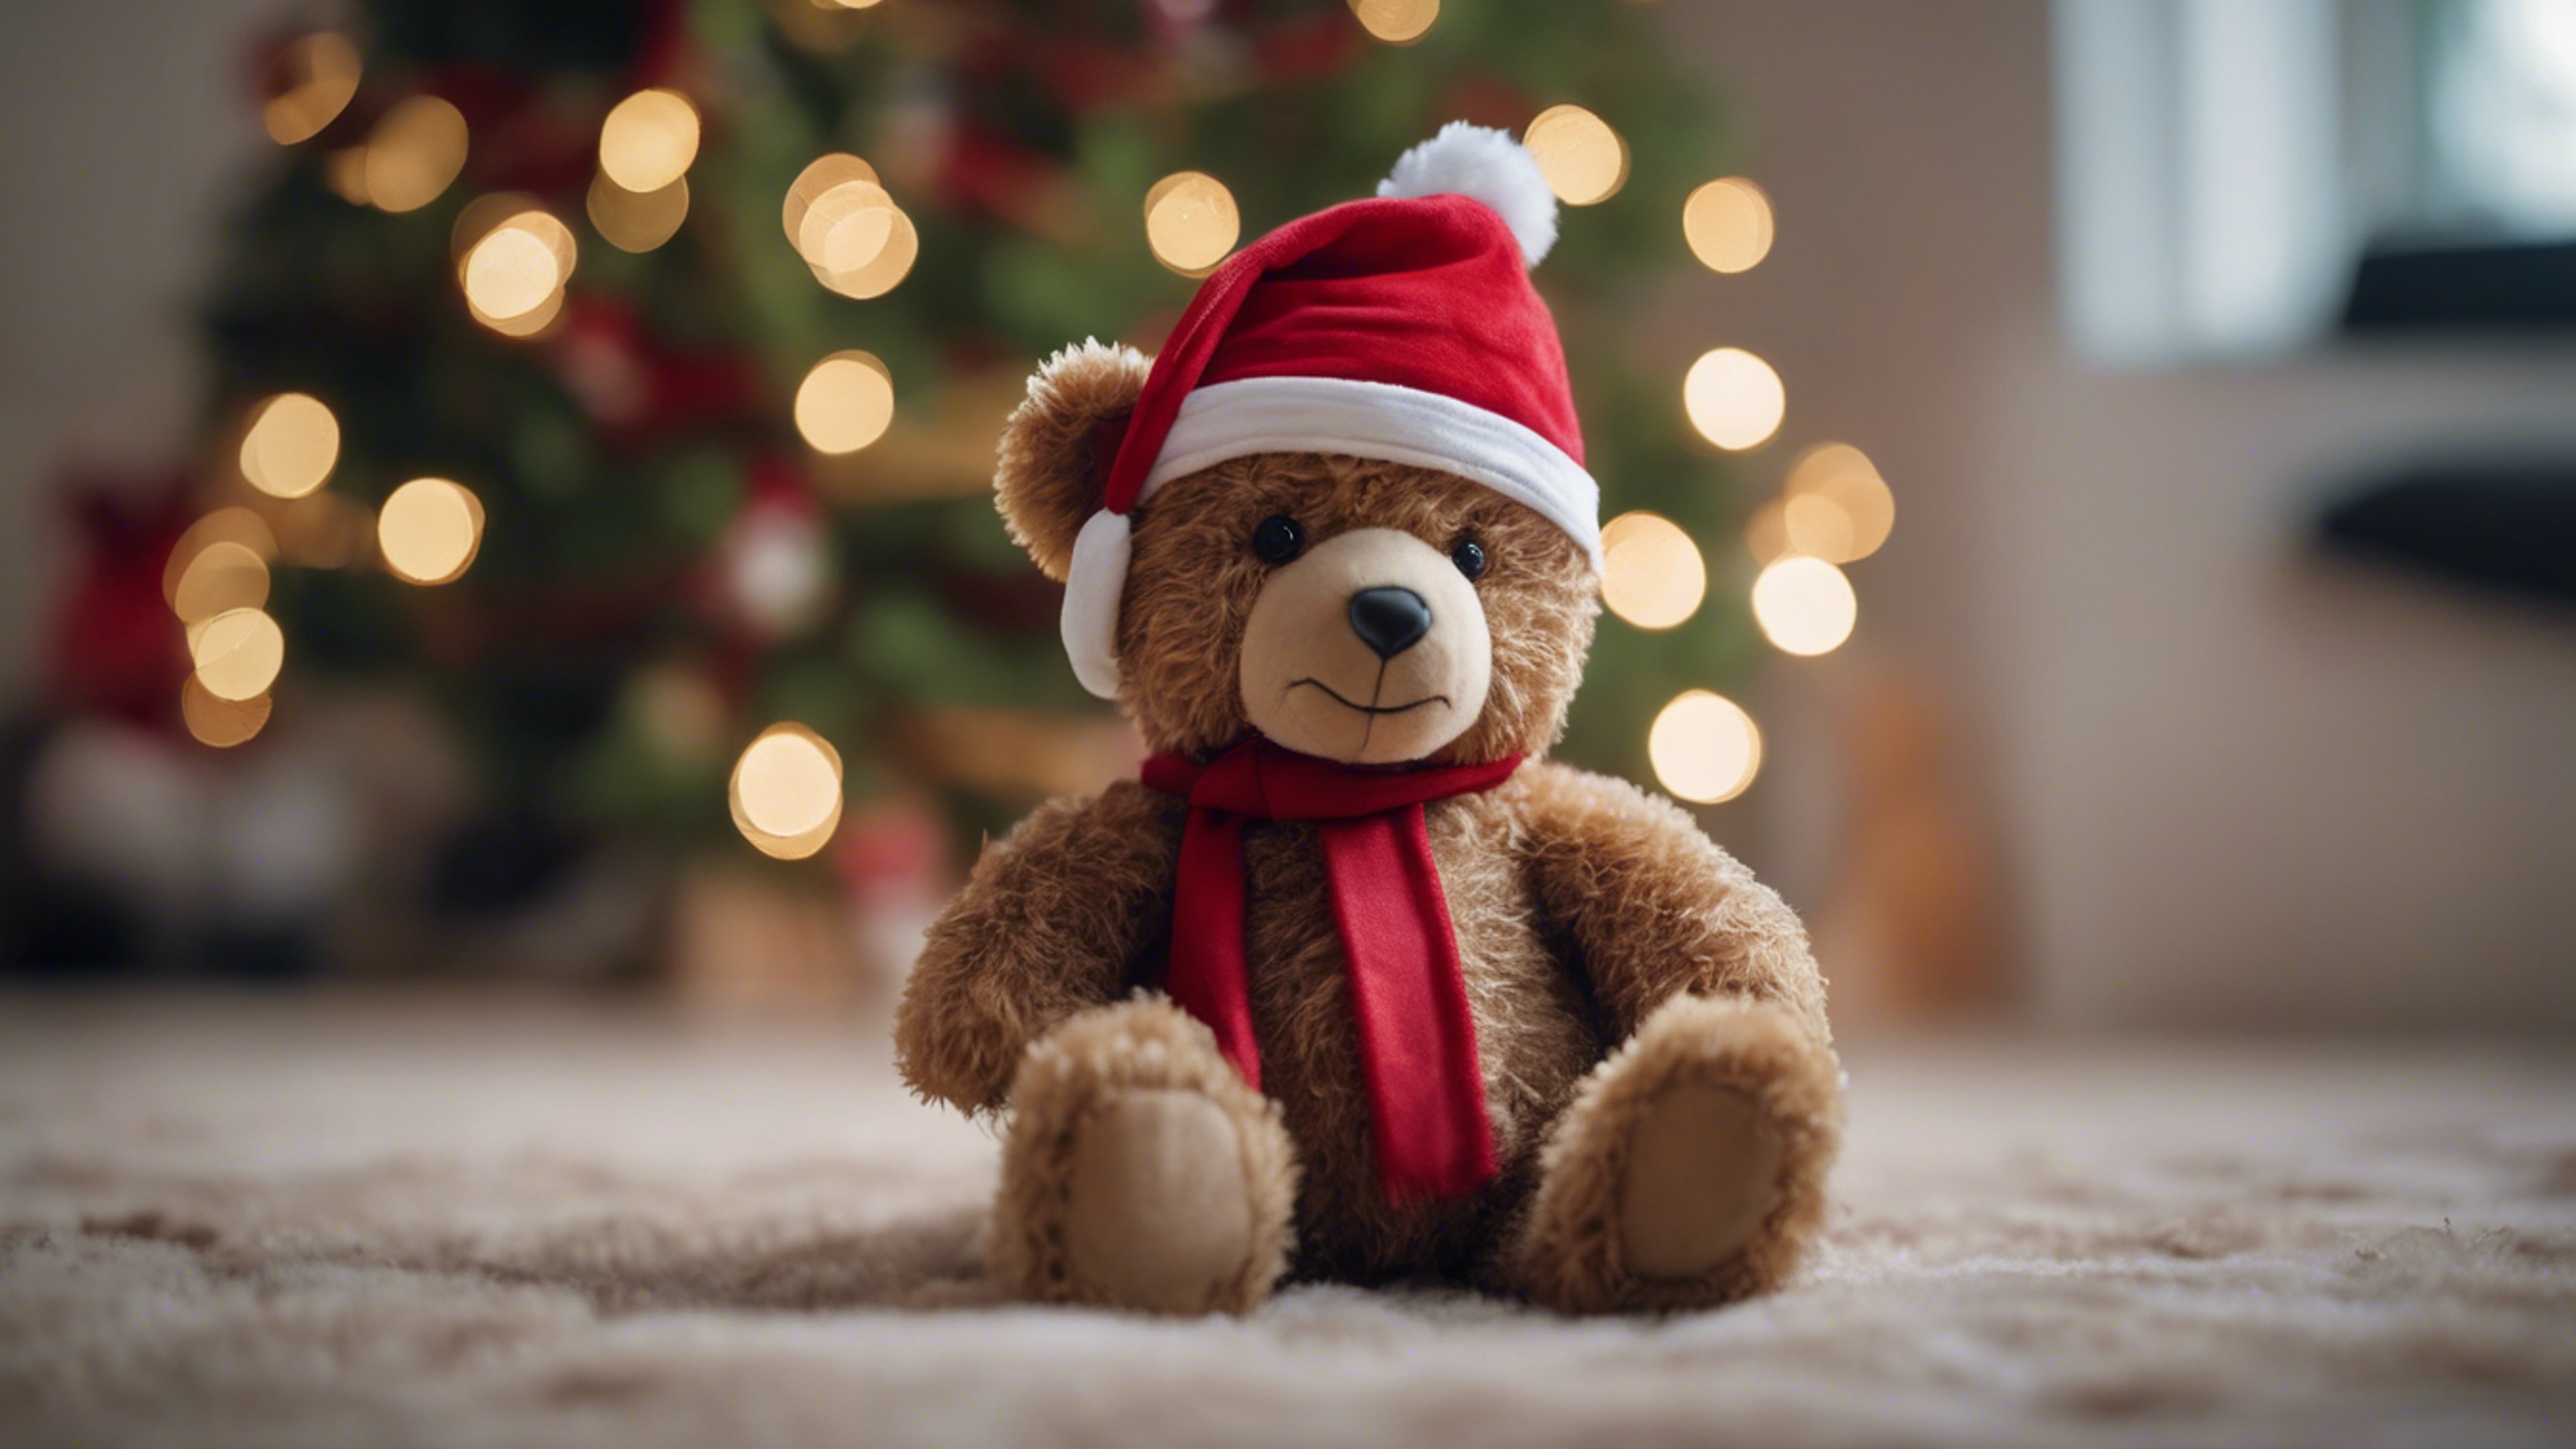 A teddy bear wearing a red Christmas hat, sitting next to a Christmas tree. 벽지[764052ee6d604b67a698]